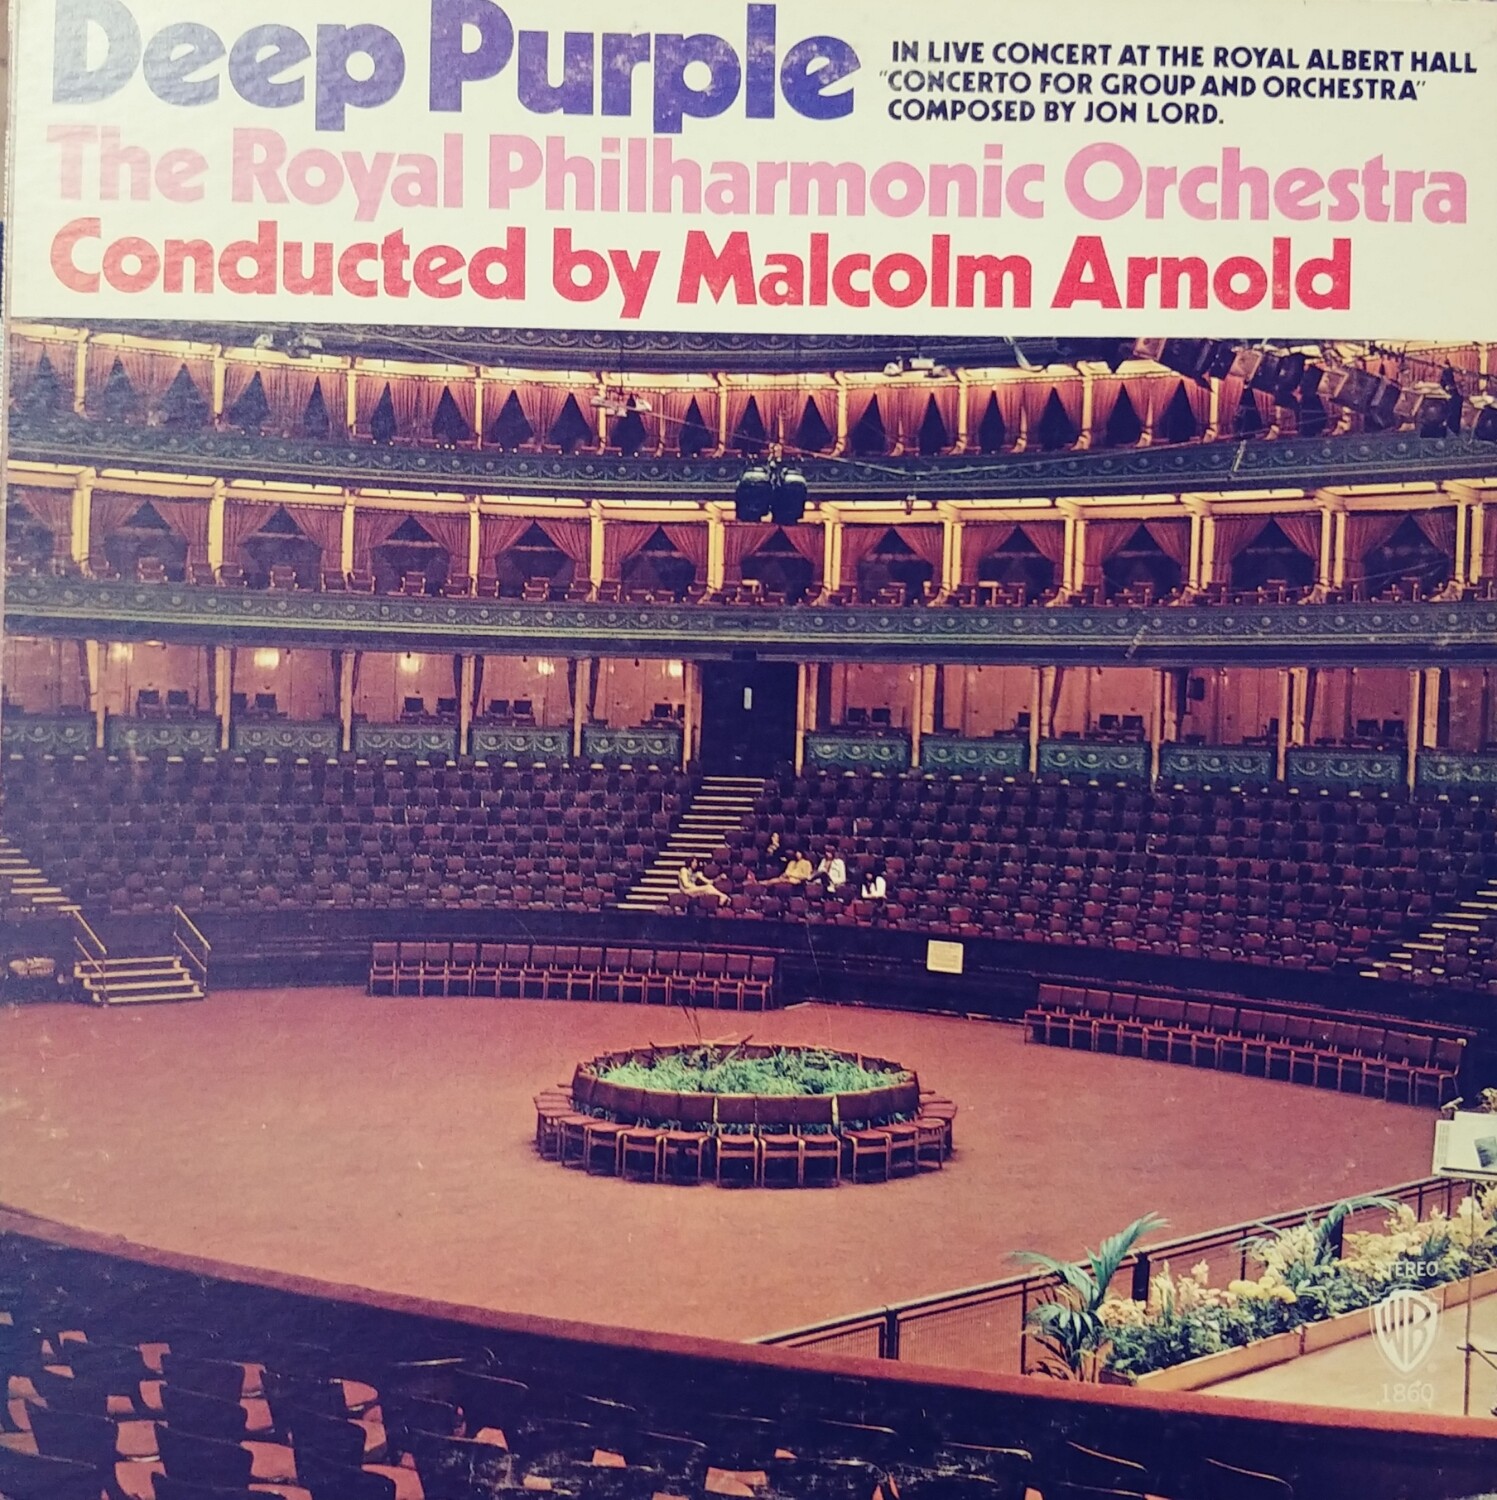 Deep Purple & The Royal Philharmonic Orchestra - Concerto for group and orchestra LIVE